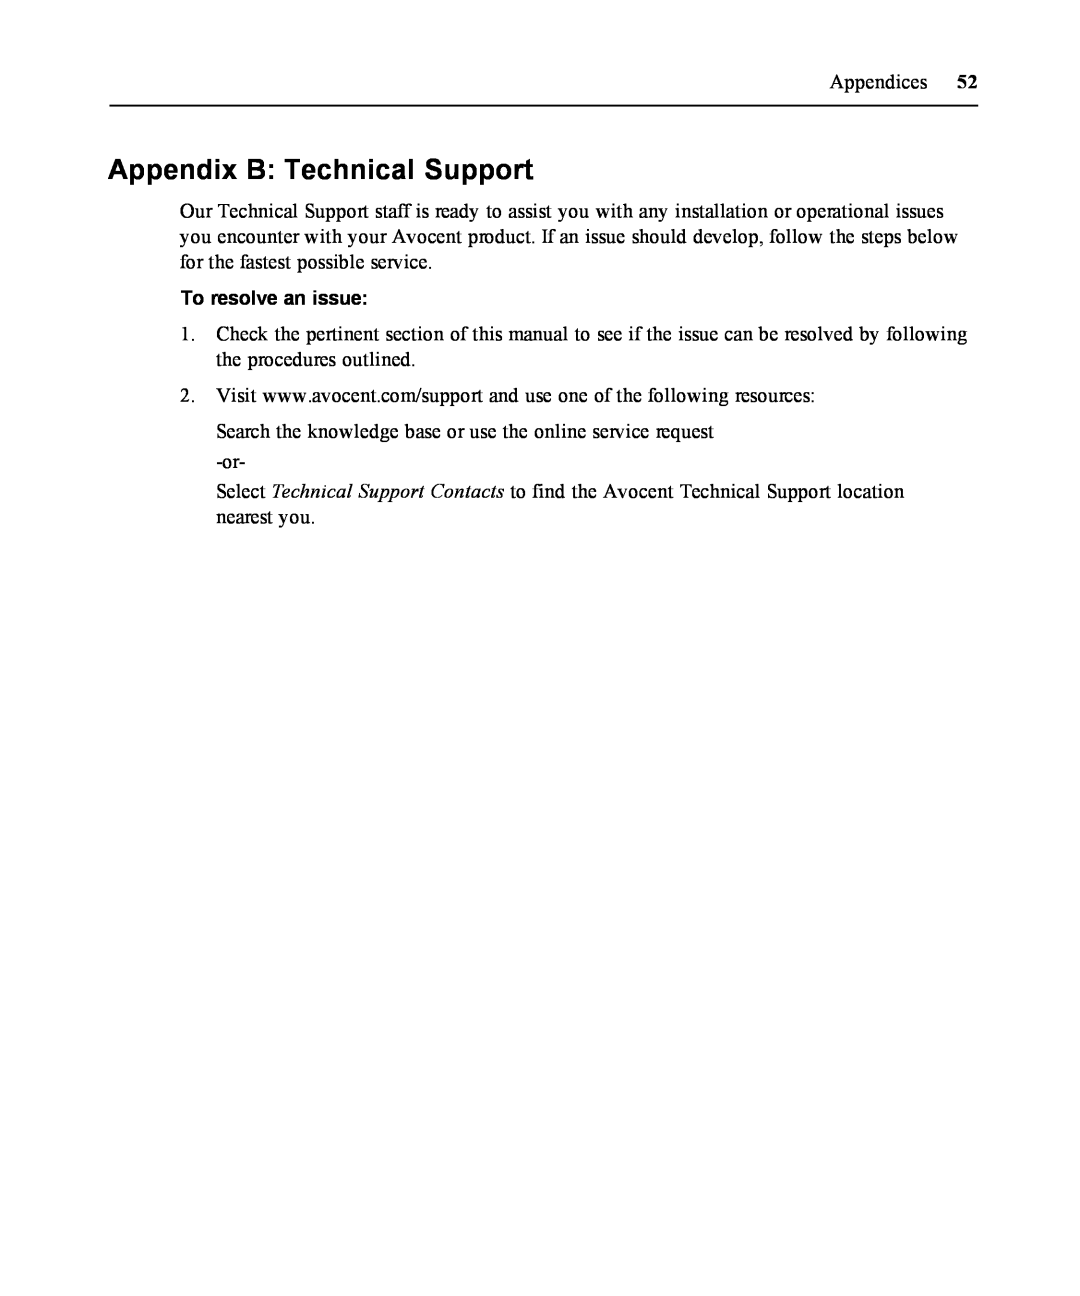 Casio ACS V6000 manual Appendix B Technical Support, To resolve an issue 